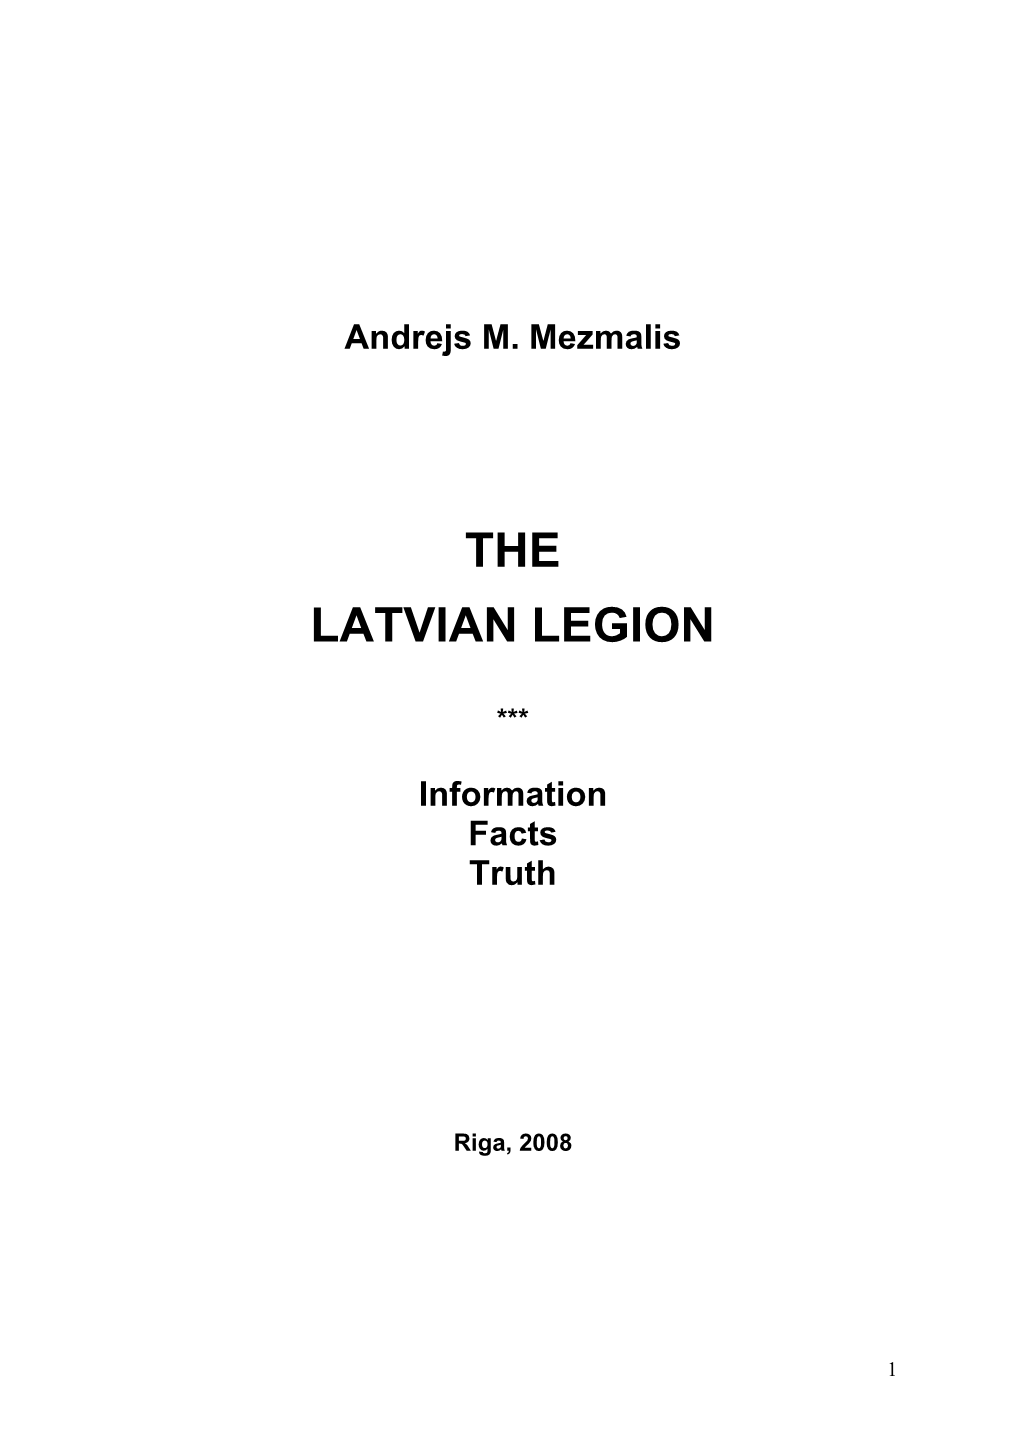 The Latvian Legion) That He Had Compiled in 1949 in Pinneberg, West Germany